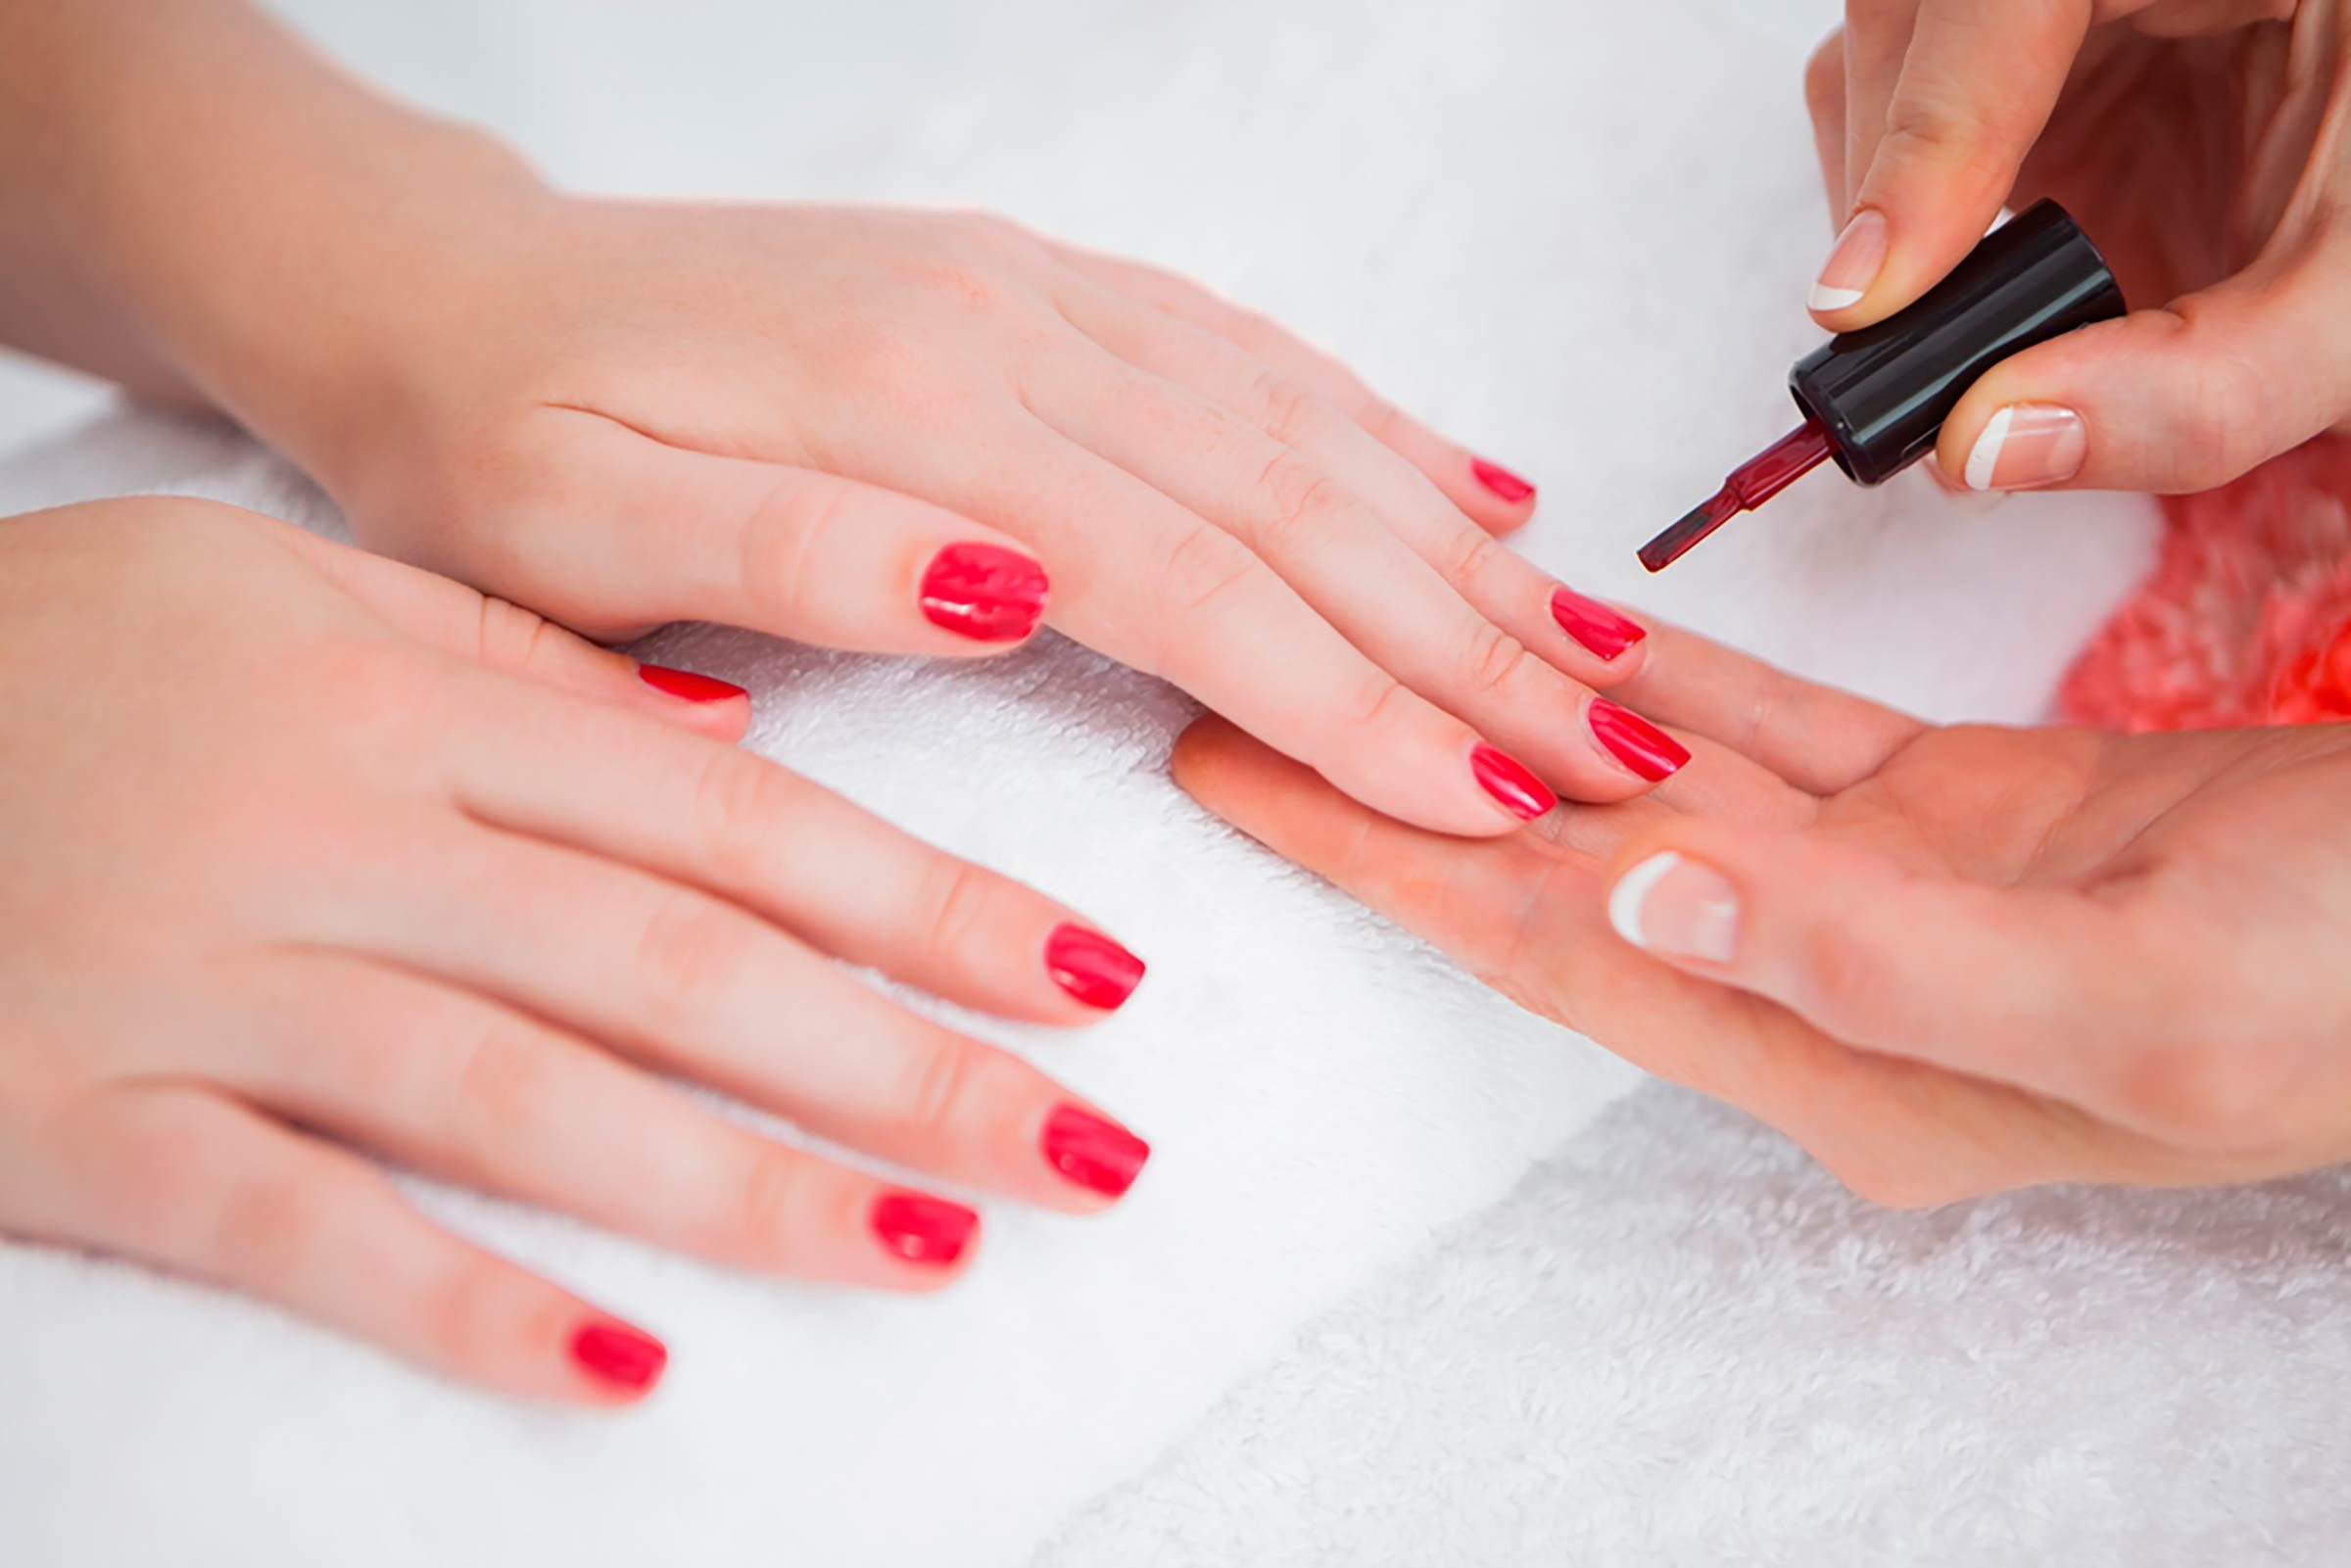 https://www.thehealthy.com/wp-content/uploads/2017/06/Too-Many-Nail-Salons-Are-Using-This-Cancer-Causing-and-Widely-Illegal-Ingredient-124048657-wavebreakmedia.jpg